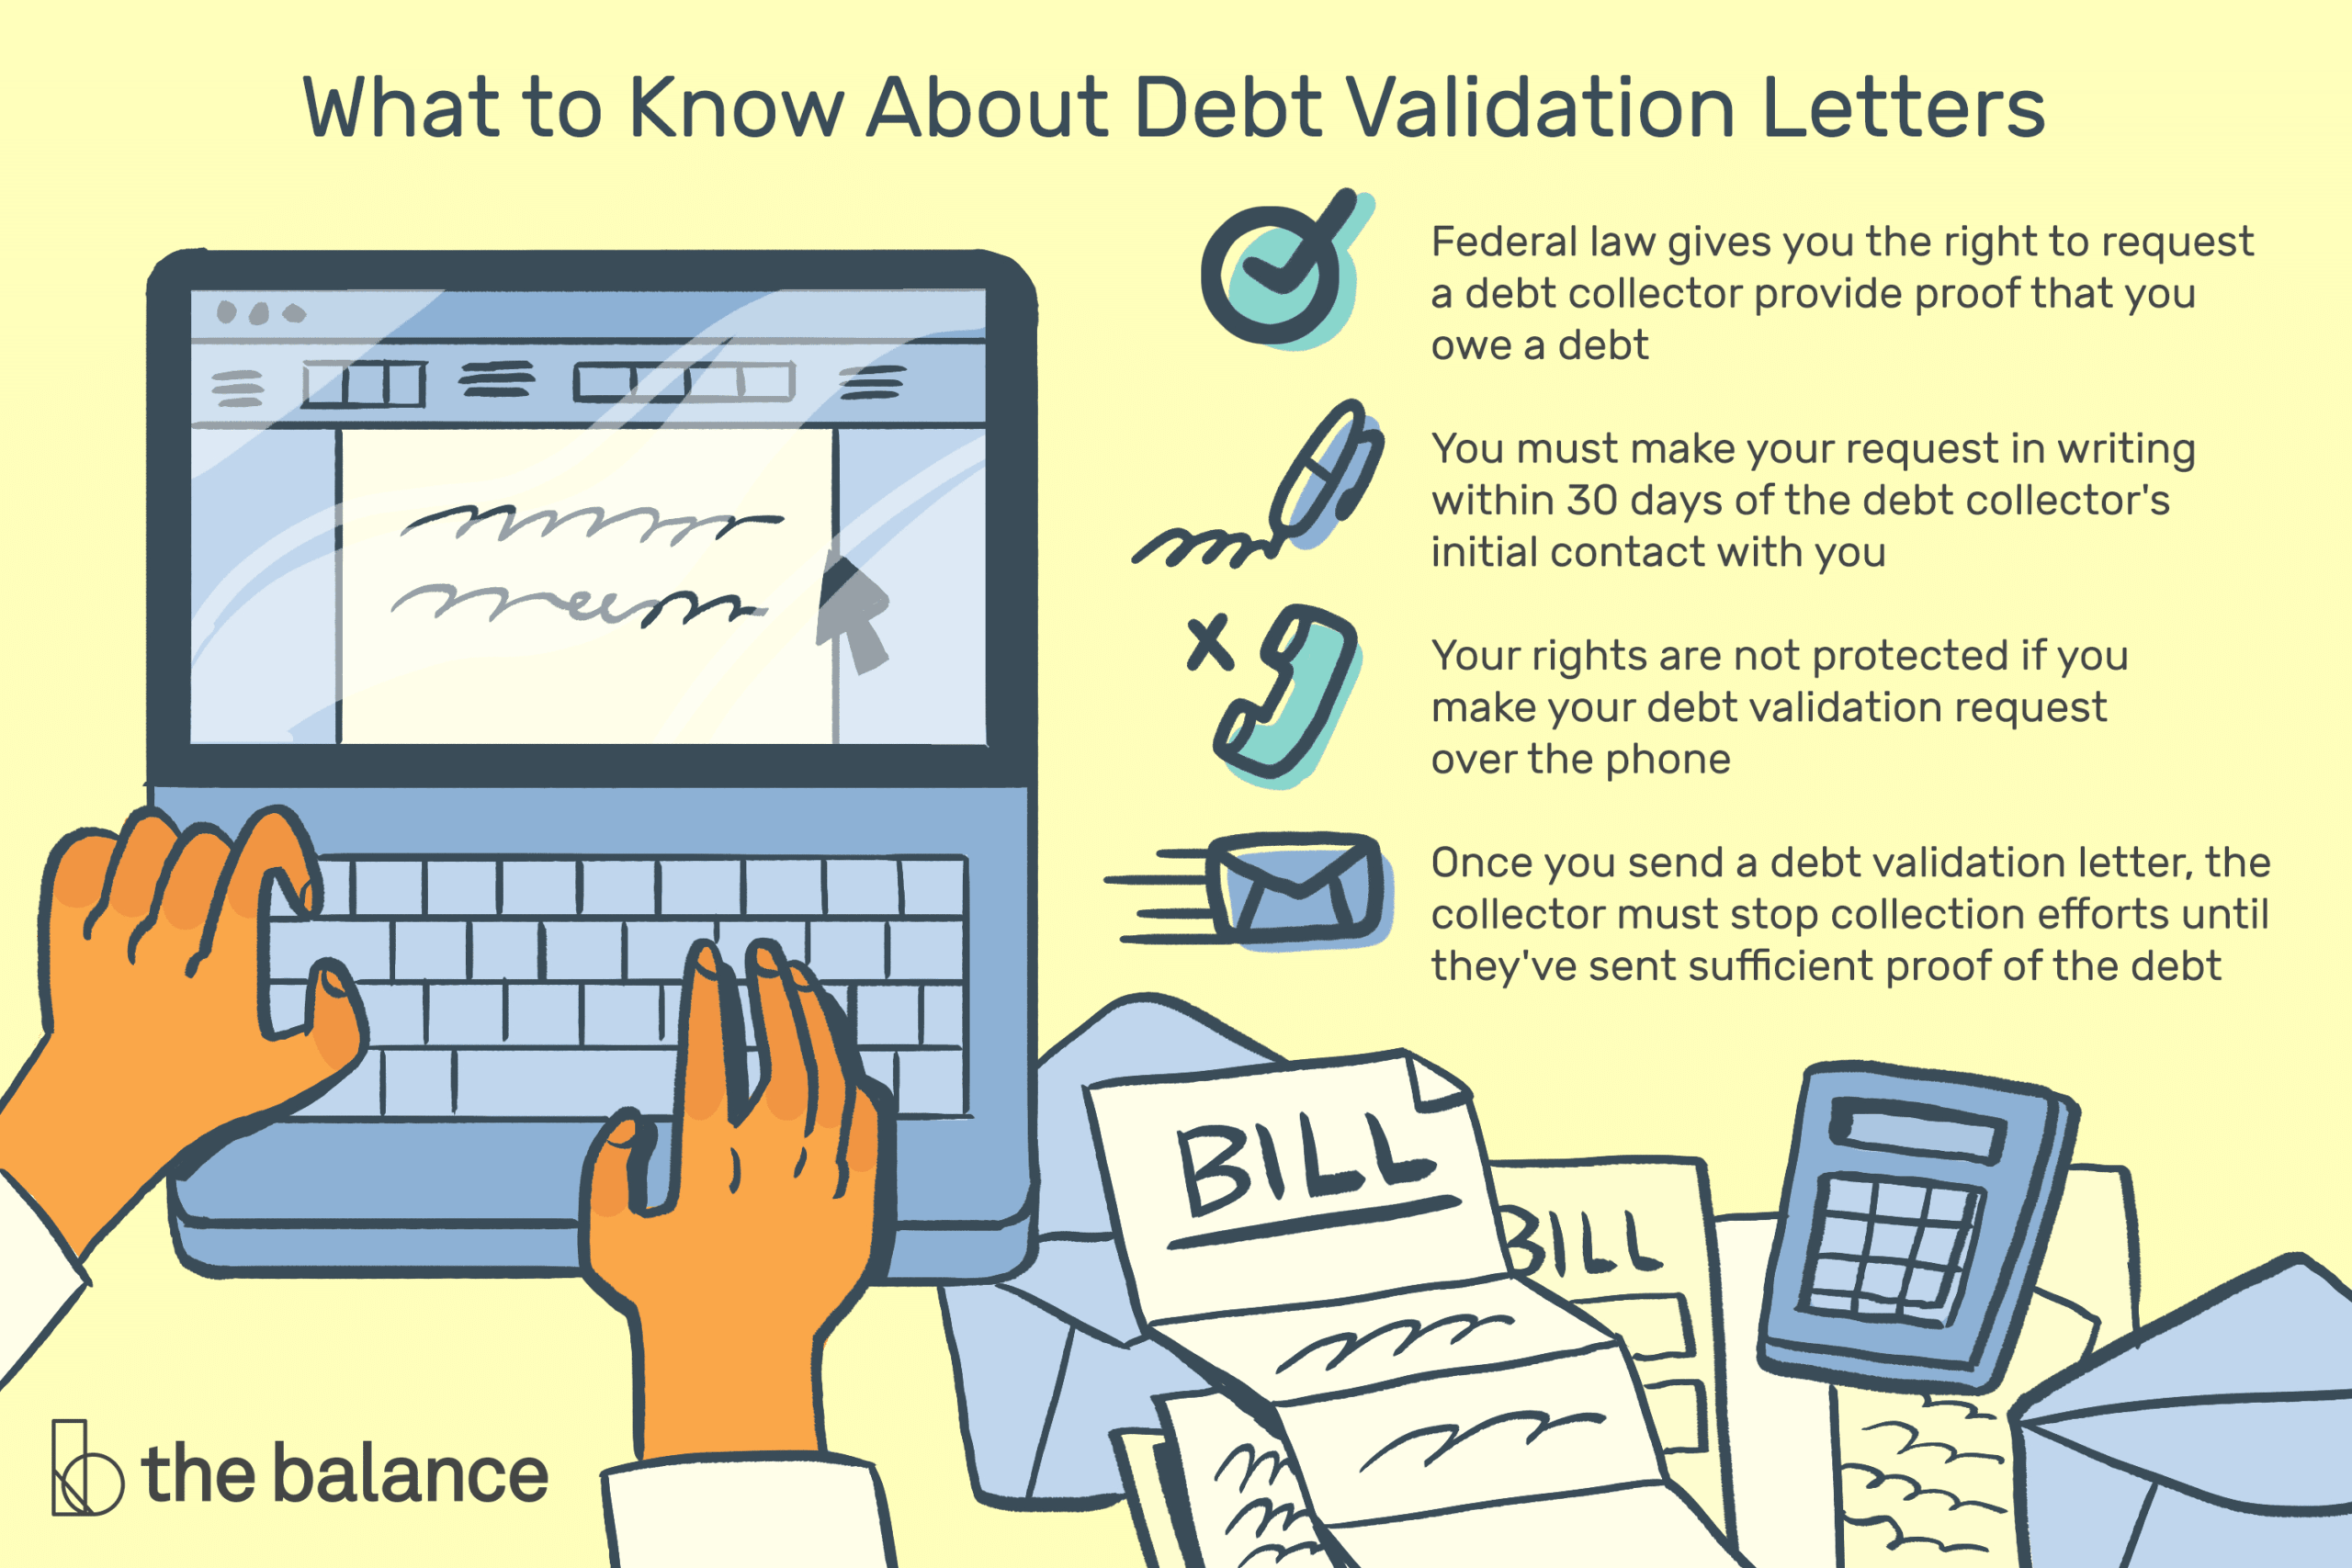 Sample Debt Validation Letter For Debt Collectors Pertaining To Dispute Letter To Creditor Template